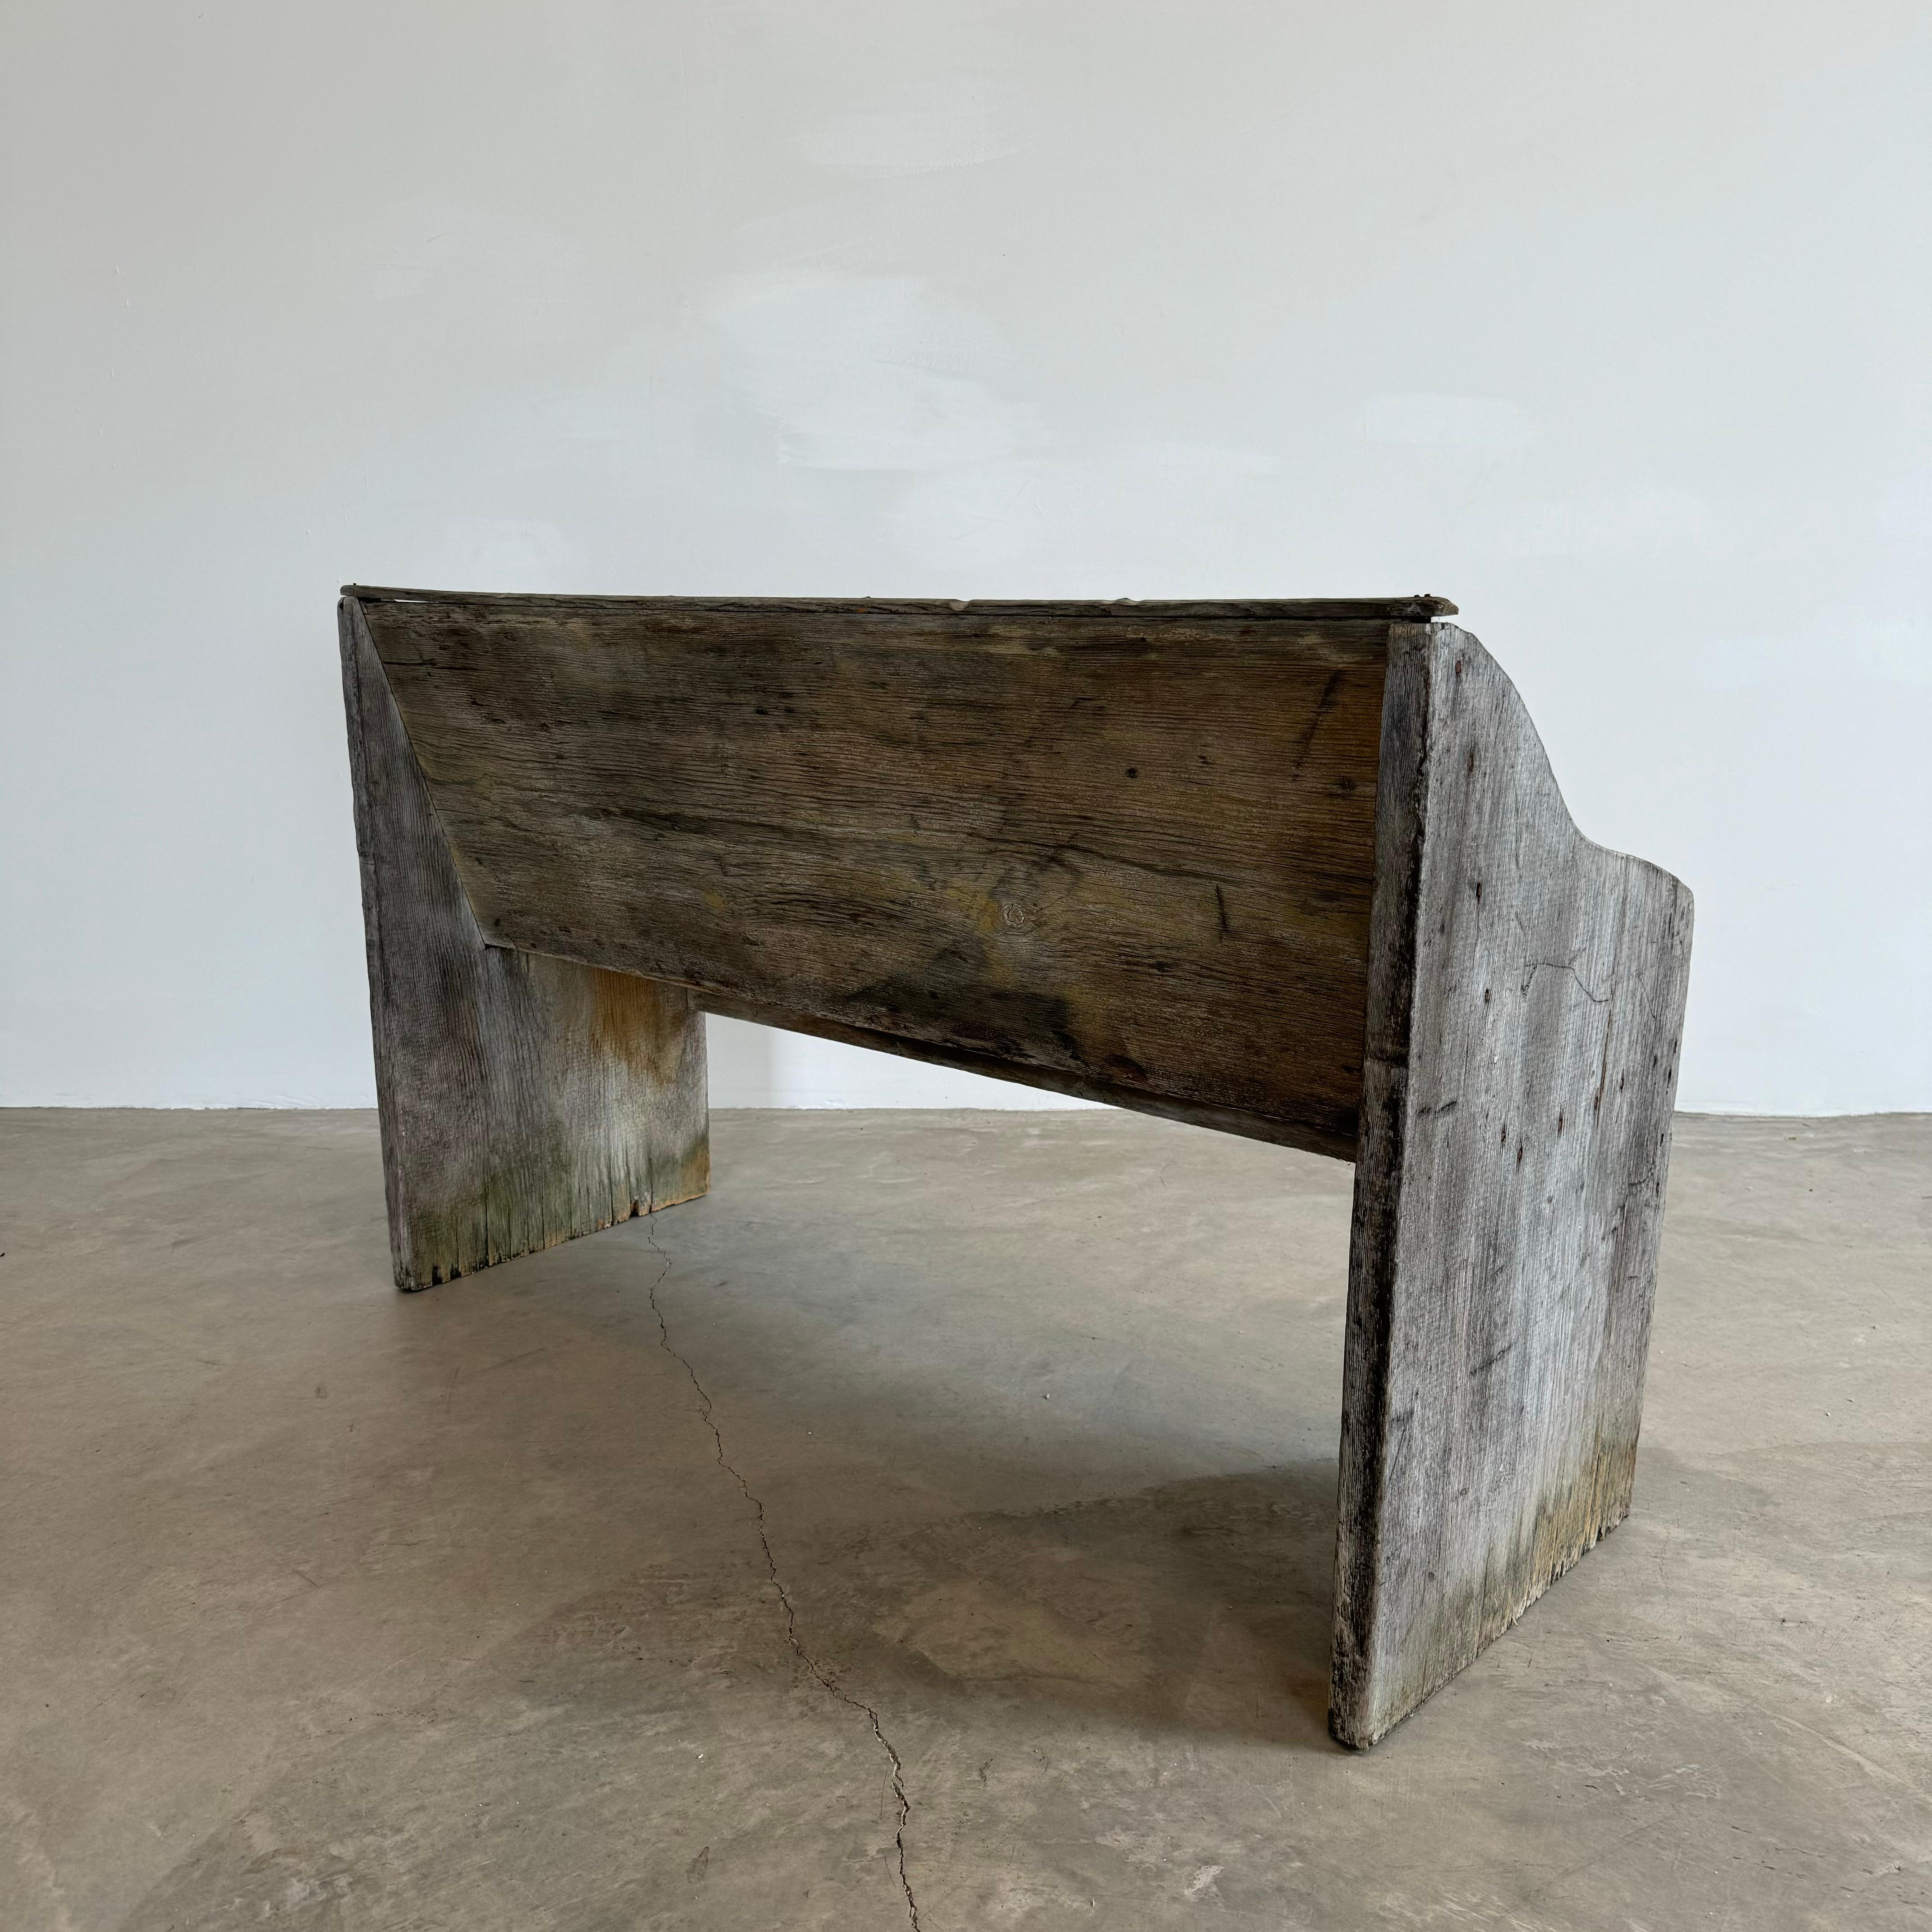 Incredible Pine chapel bench from the late 1800s. Thick panels of solid pine were used to construct this piece. After years of use and natural exposure the bench developed the one of a kind patina seen here. This bench is held together with small